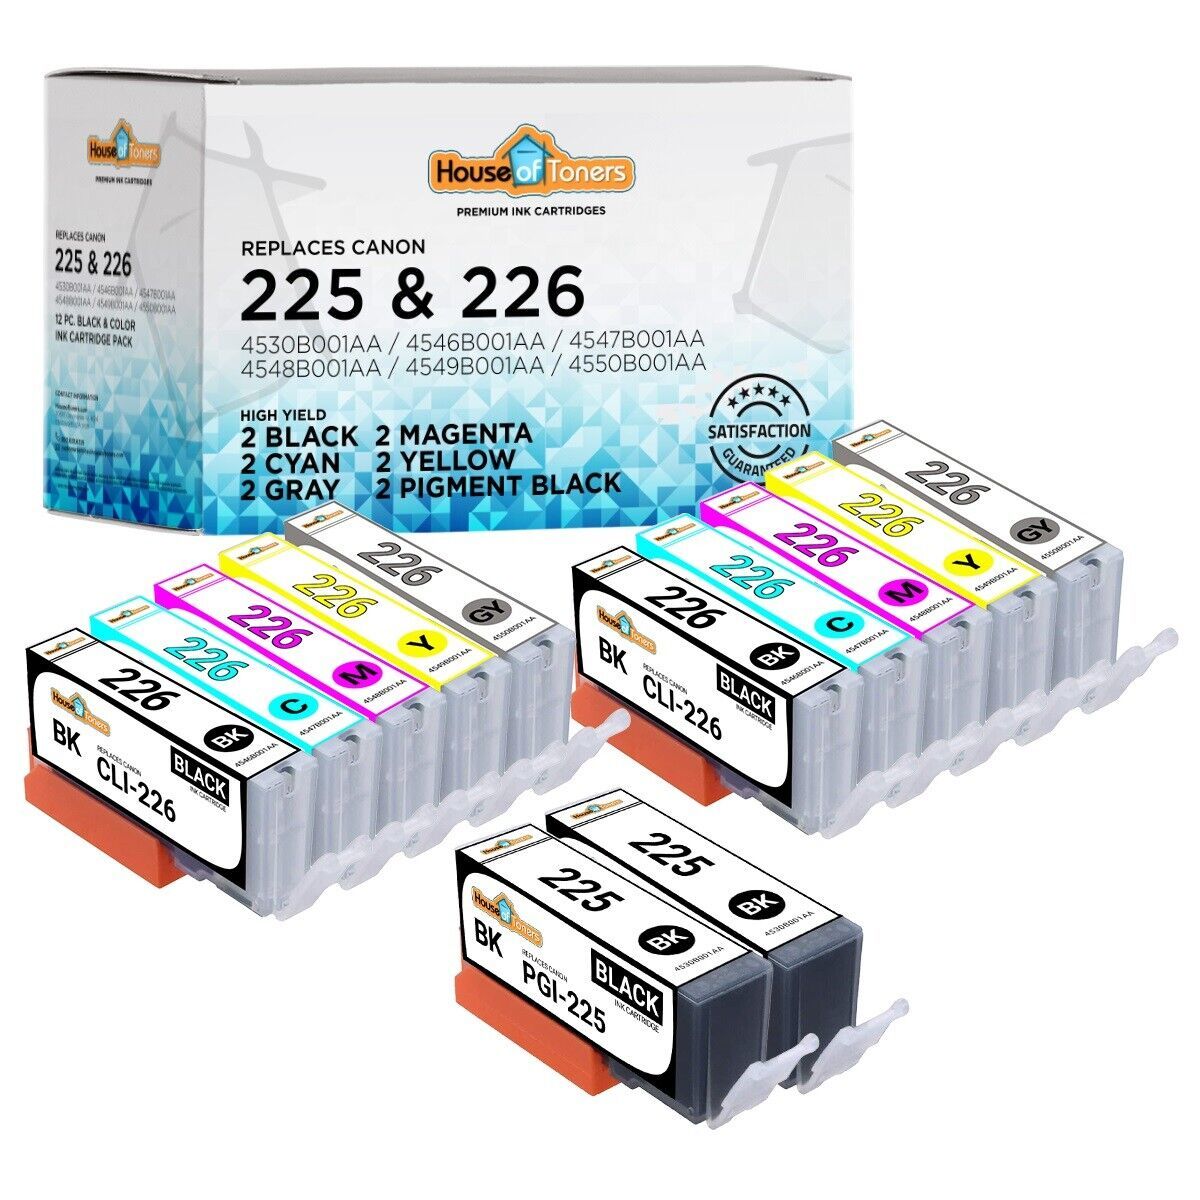 Primary image for 12Pk Pgi-225 Cli-226 Ink For Canon Pixma Mg6120 Mg6220 Mg8120 Mg8220 W/ Gray